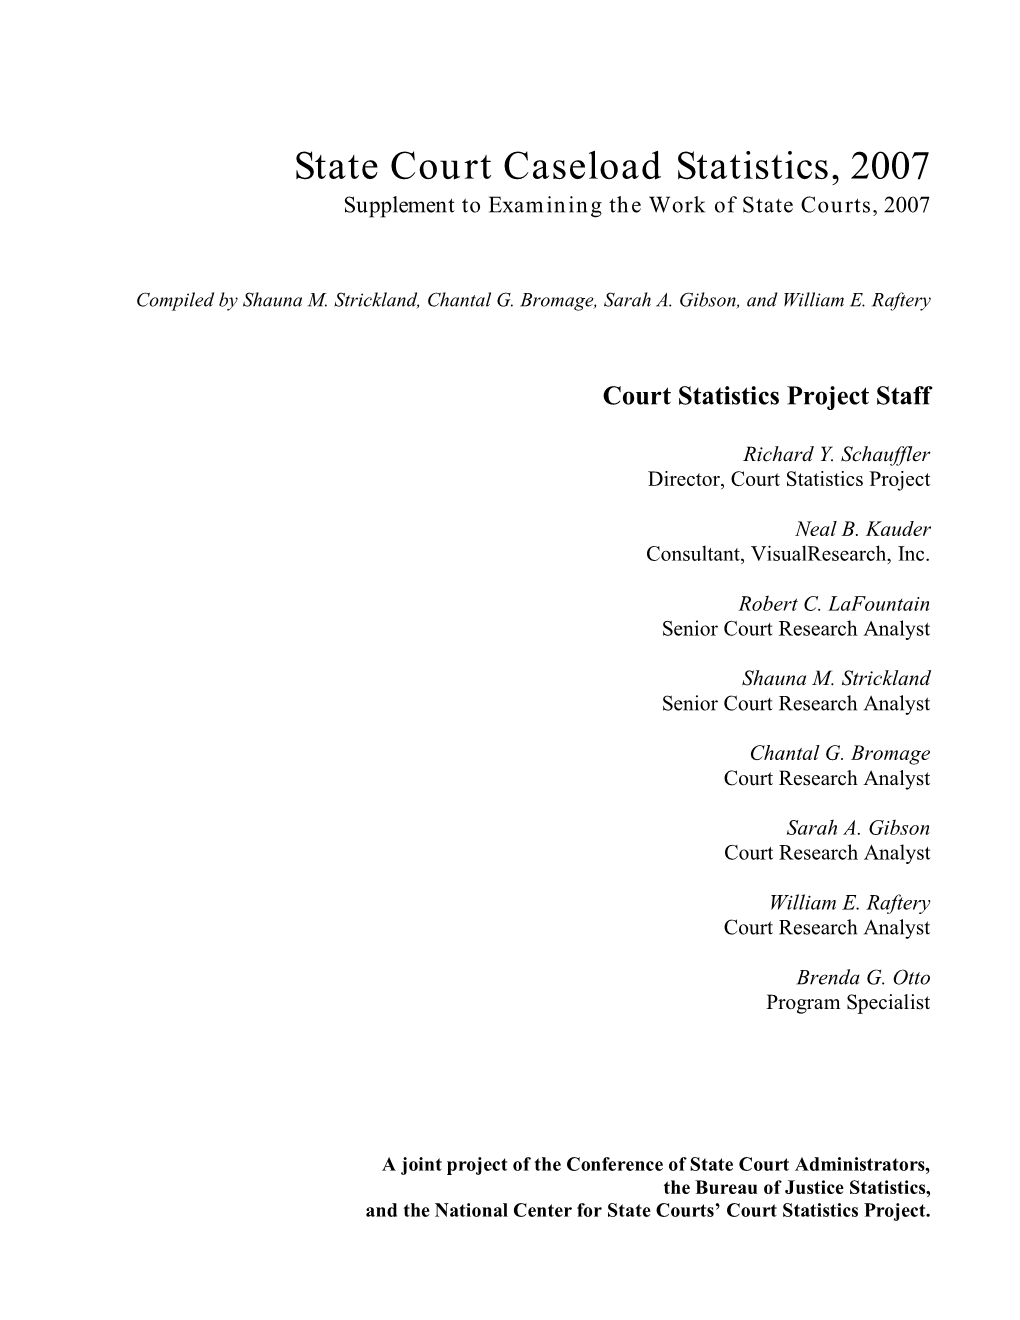 State Court Caseload Statistics, 2007 Supplement to Examining the Work of State Courts, 2007